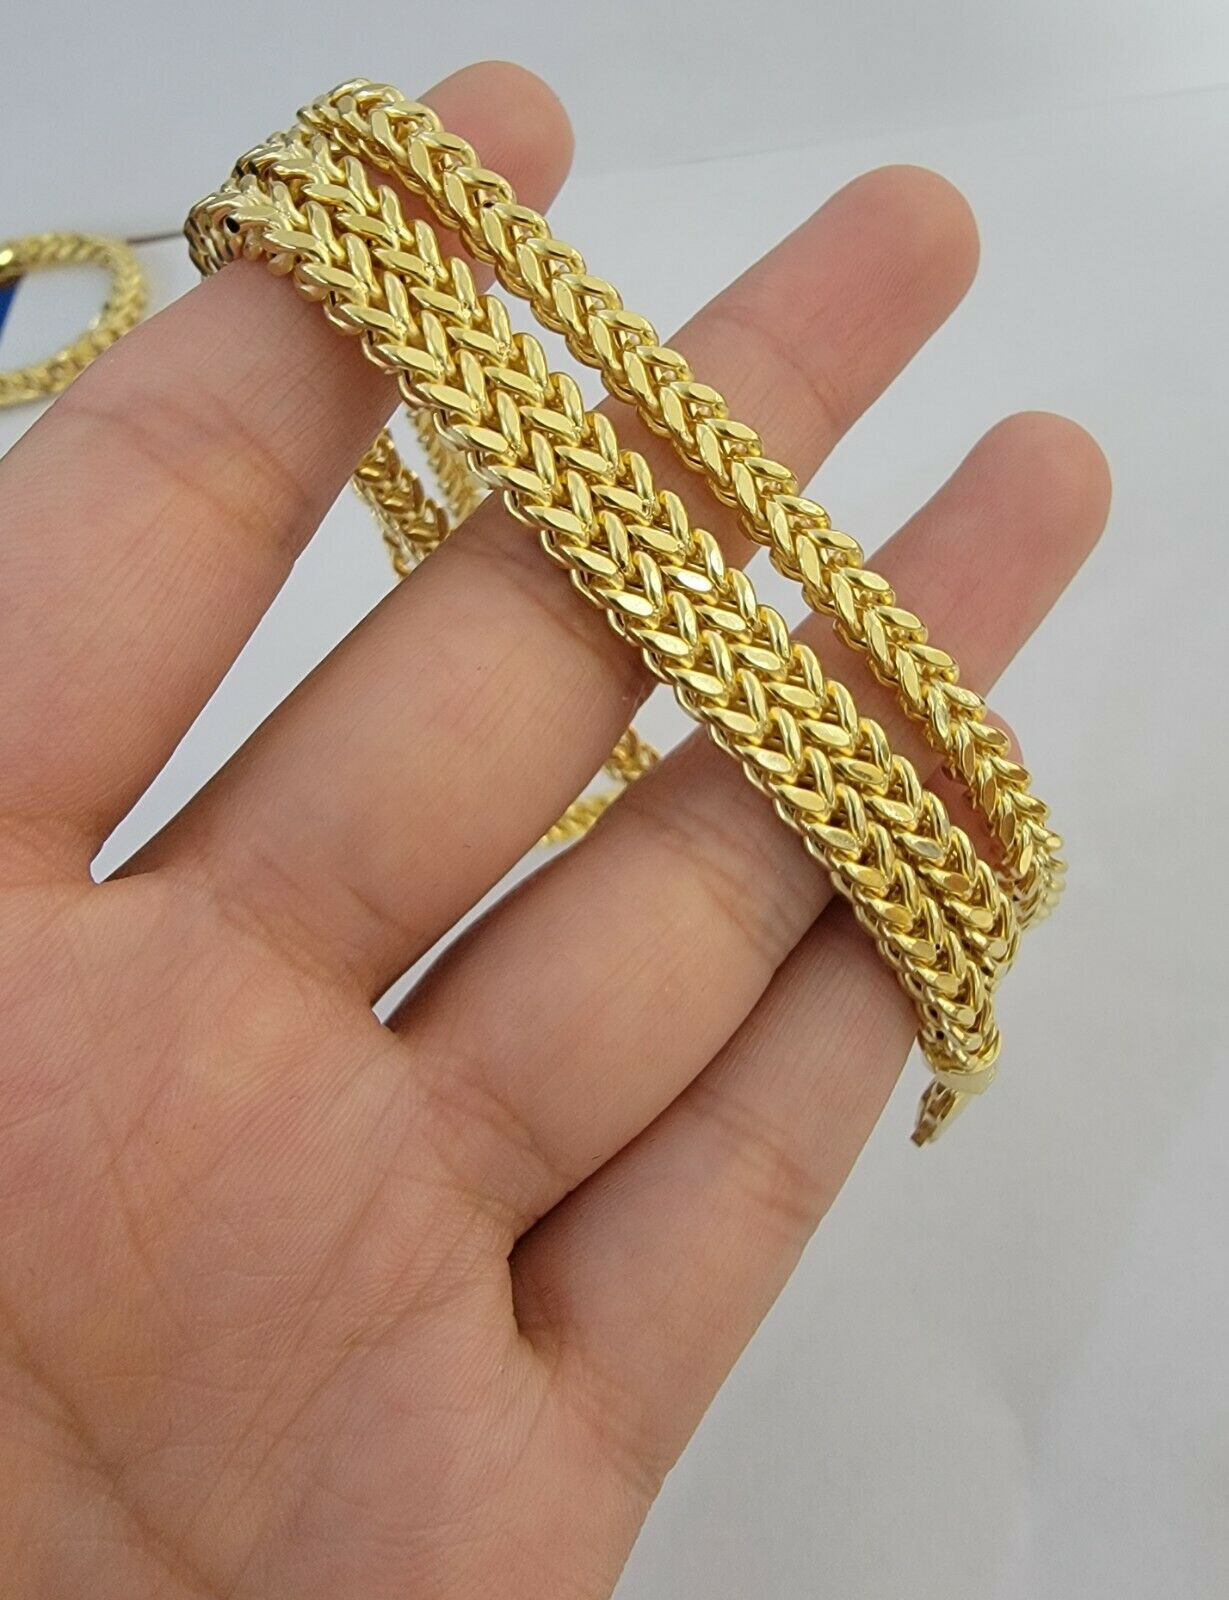 10K Gold Franco Link Chain 26" Necklace 5mm Thick, REAL 10kt Men's STRONG Chain